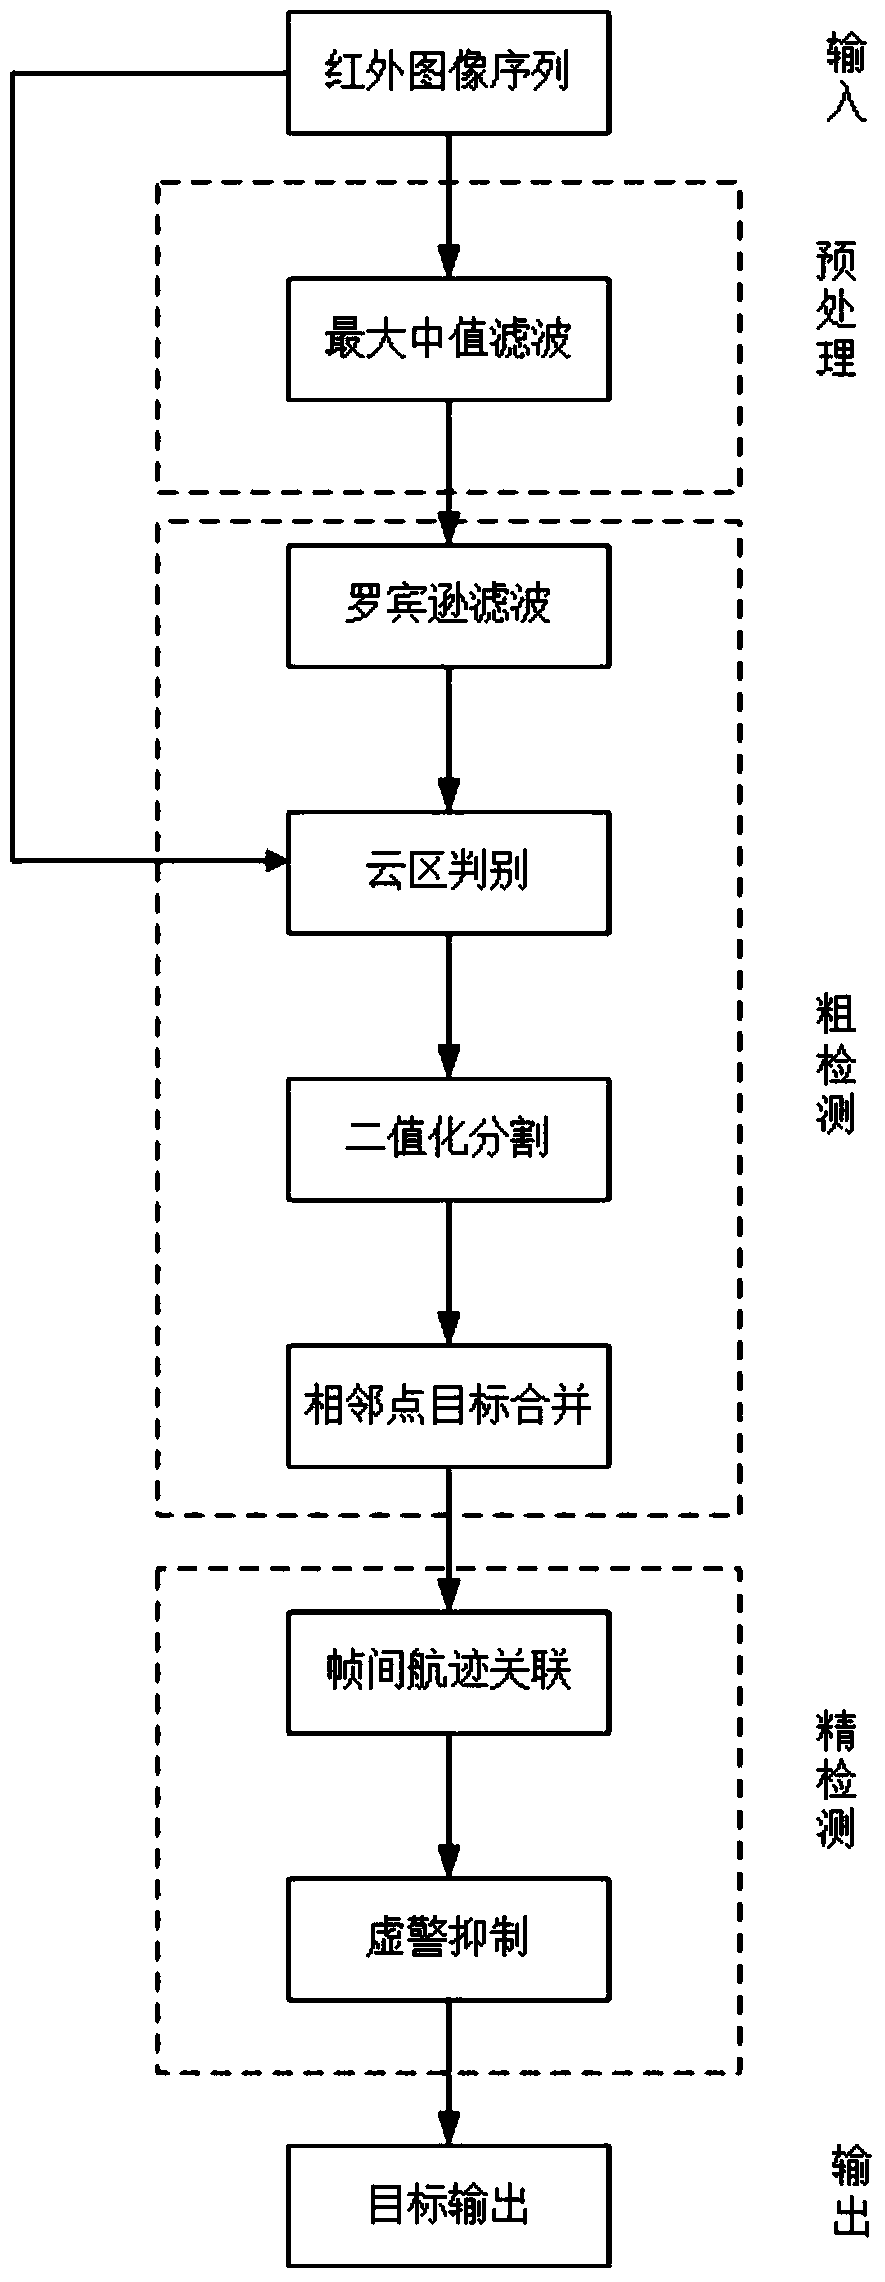 Infrared small target detection method based on template filter and false alarm suppression in cloud background